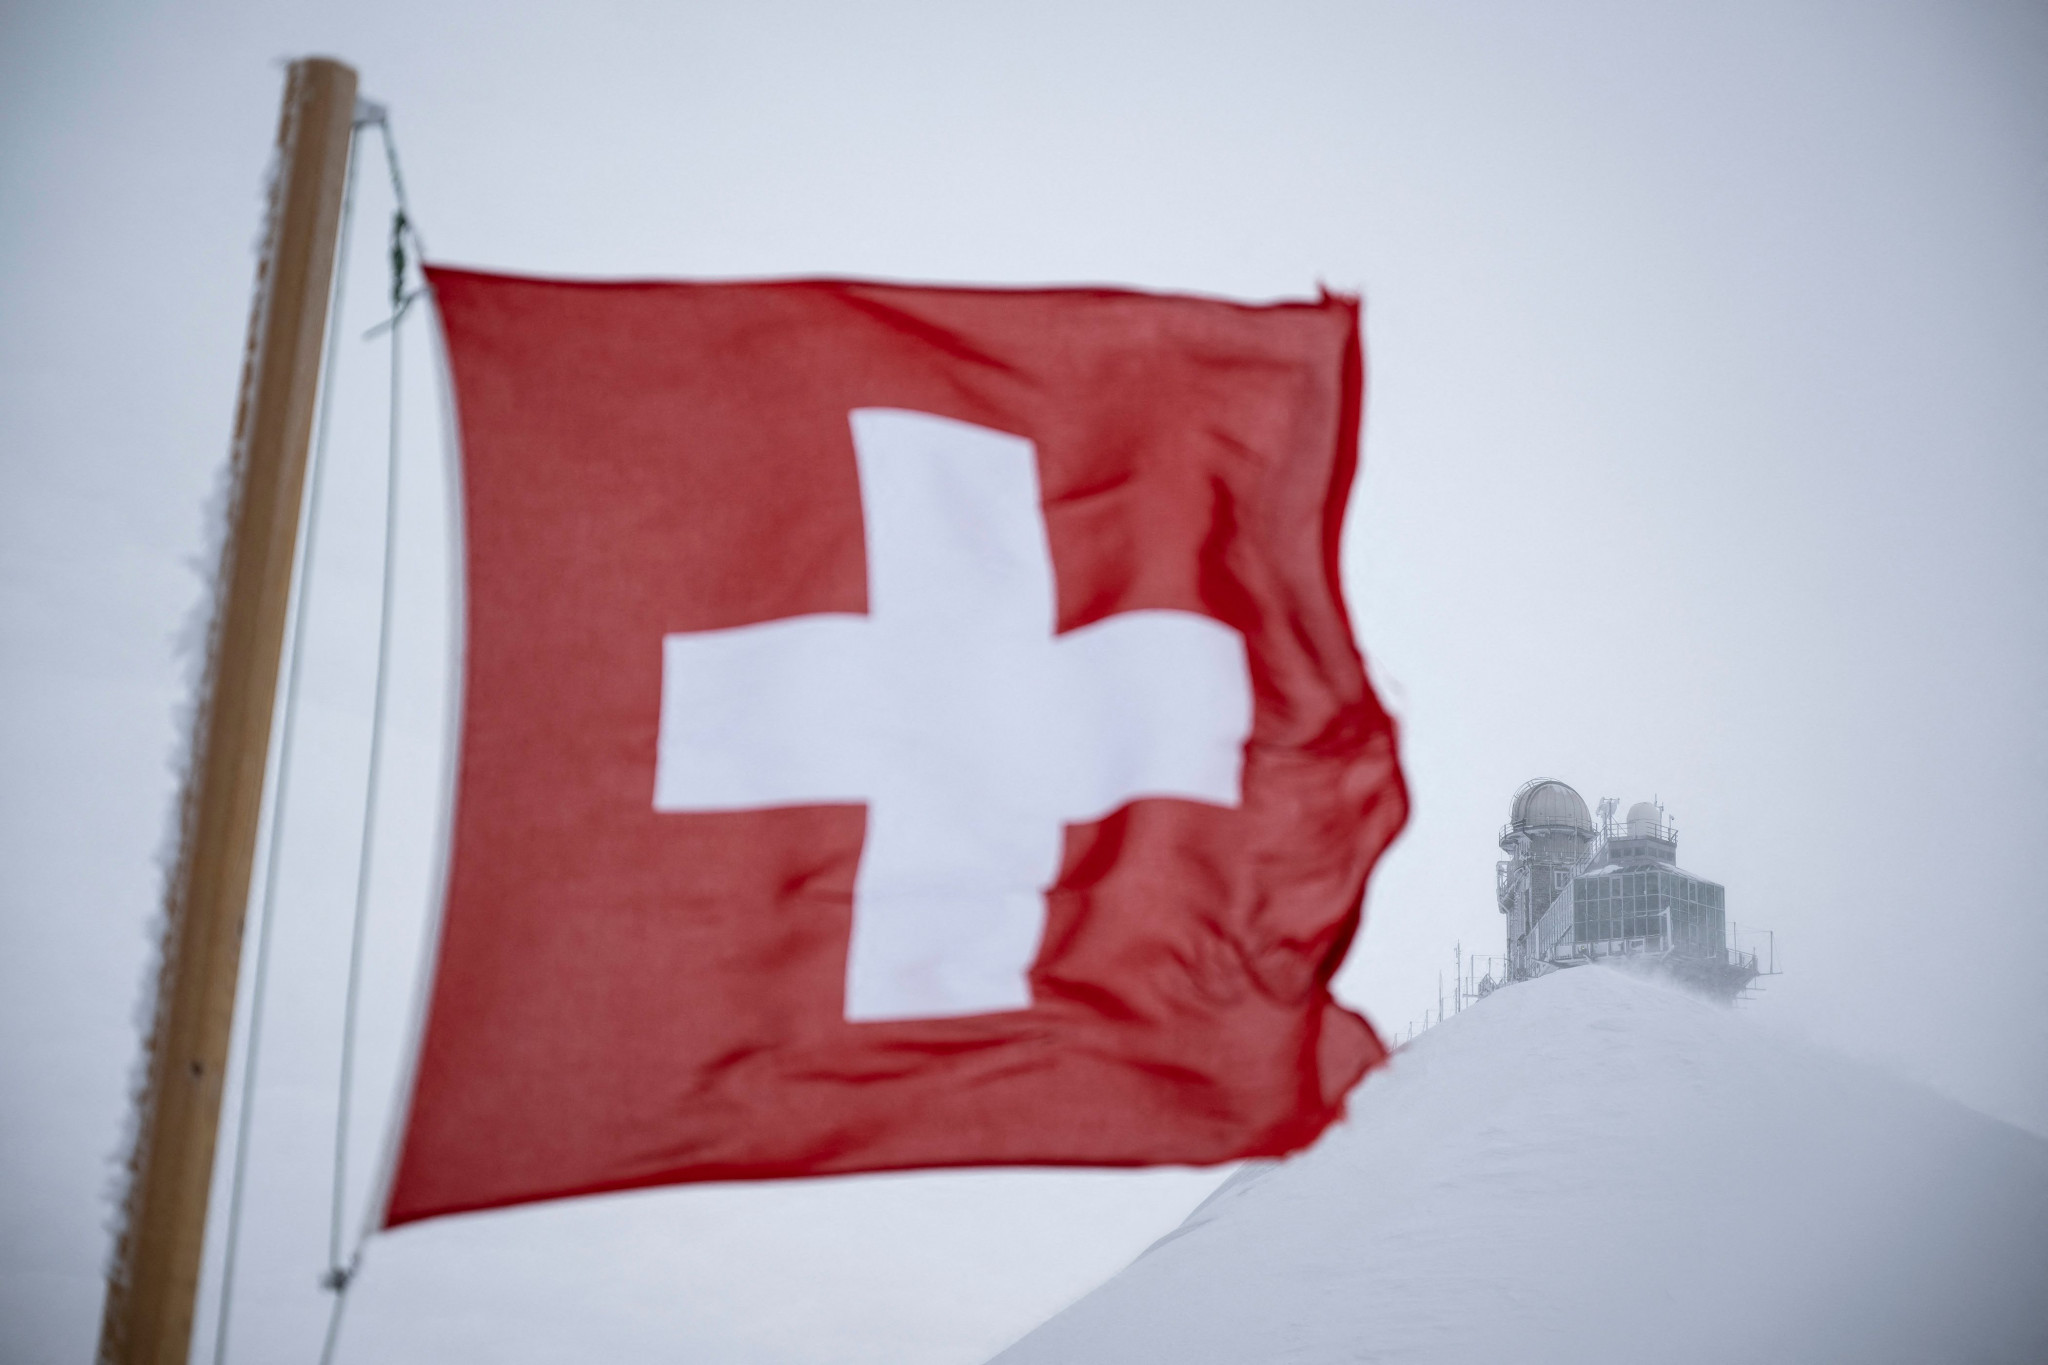 Switzerland is set to send 95 athletes to the Winter EYOF in Friuli Venezia Giulia ©Getty Images